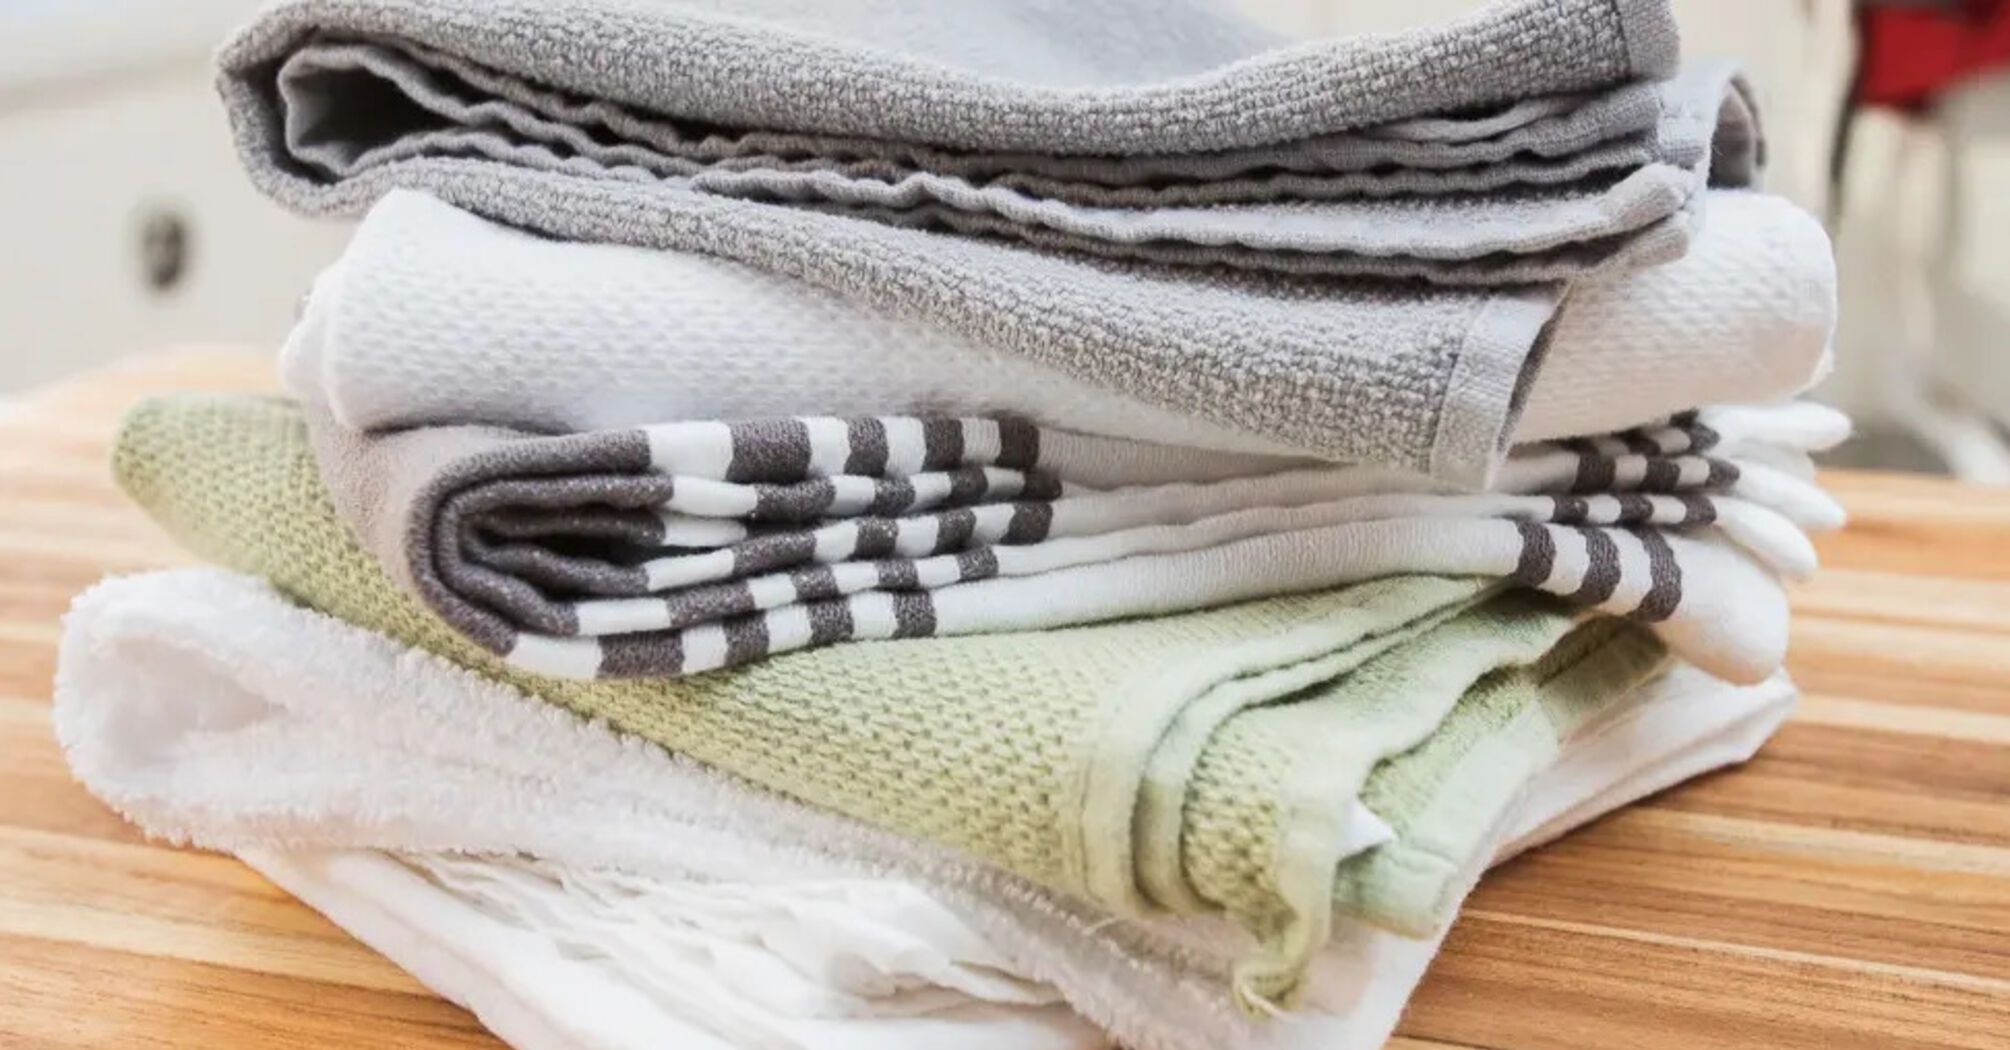 Kitchen towels will be as good as new in a few minutes